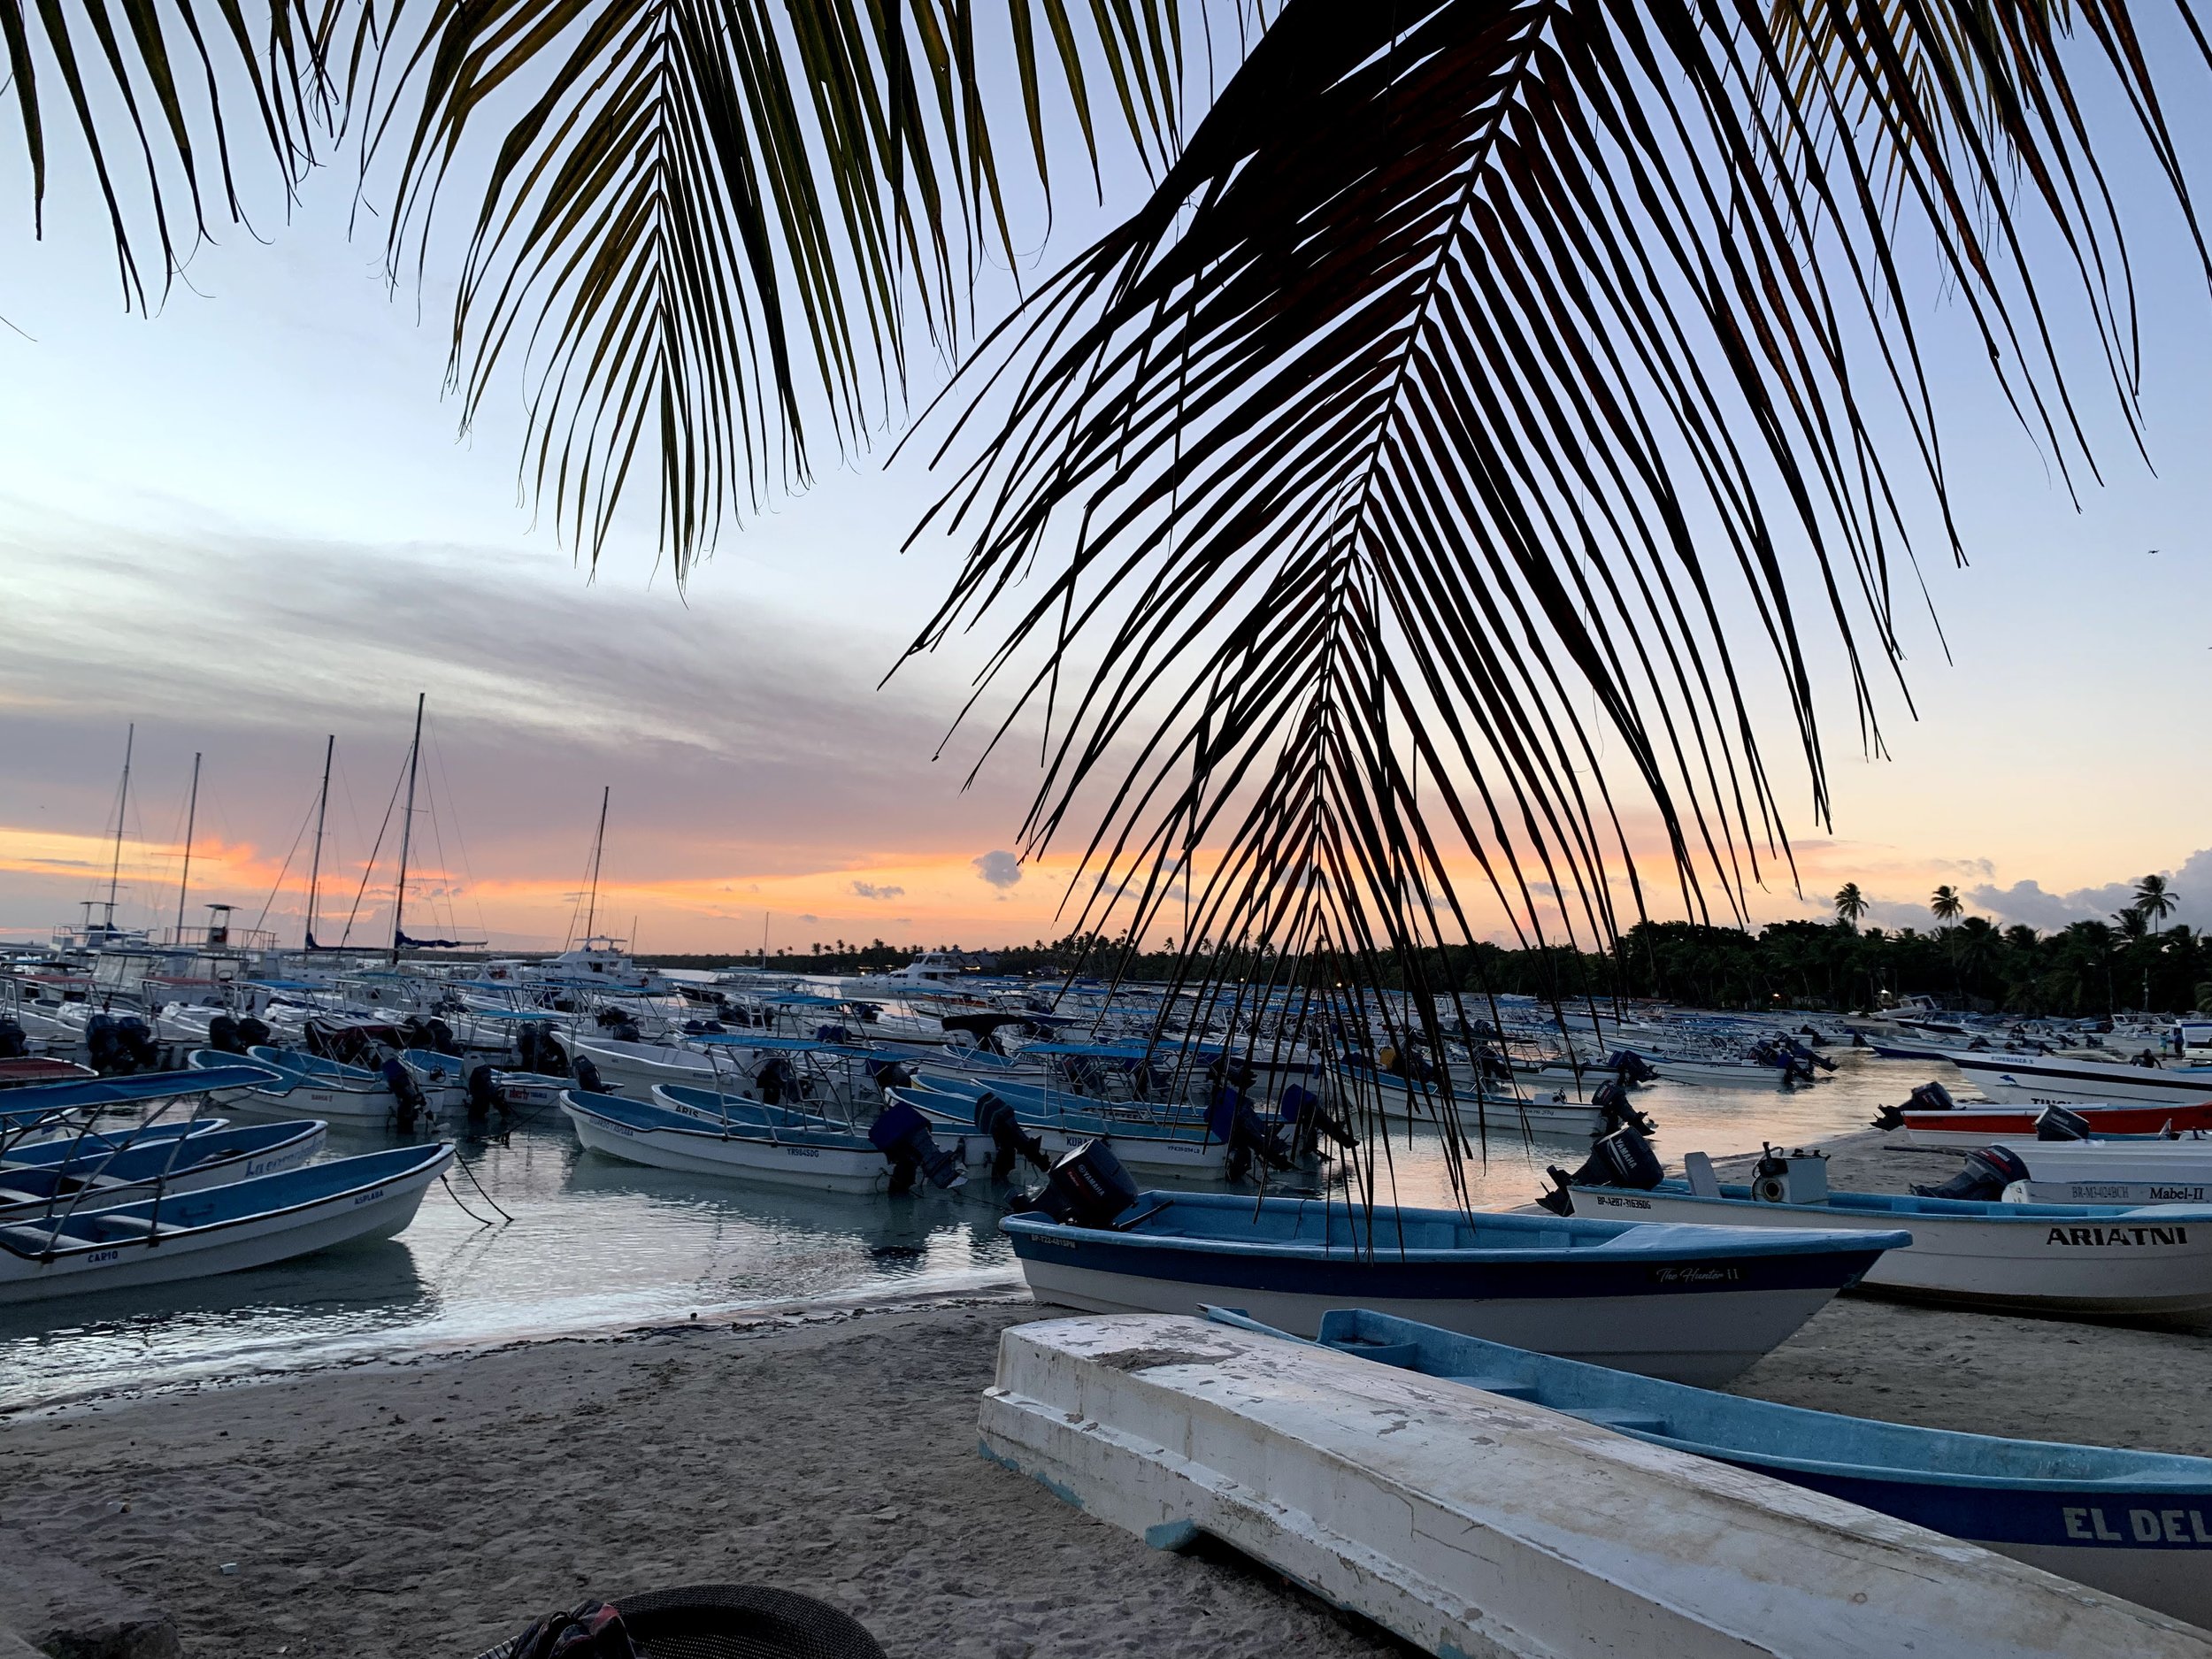 boats in a bay in the Dominican Republic.jpg